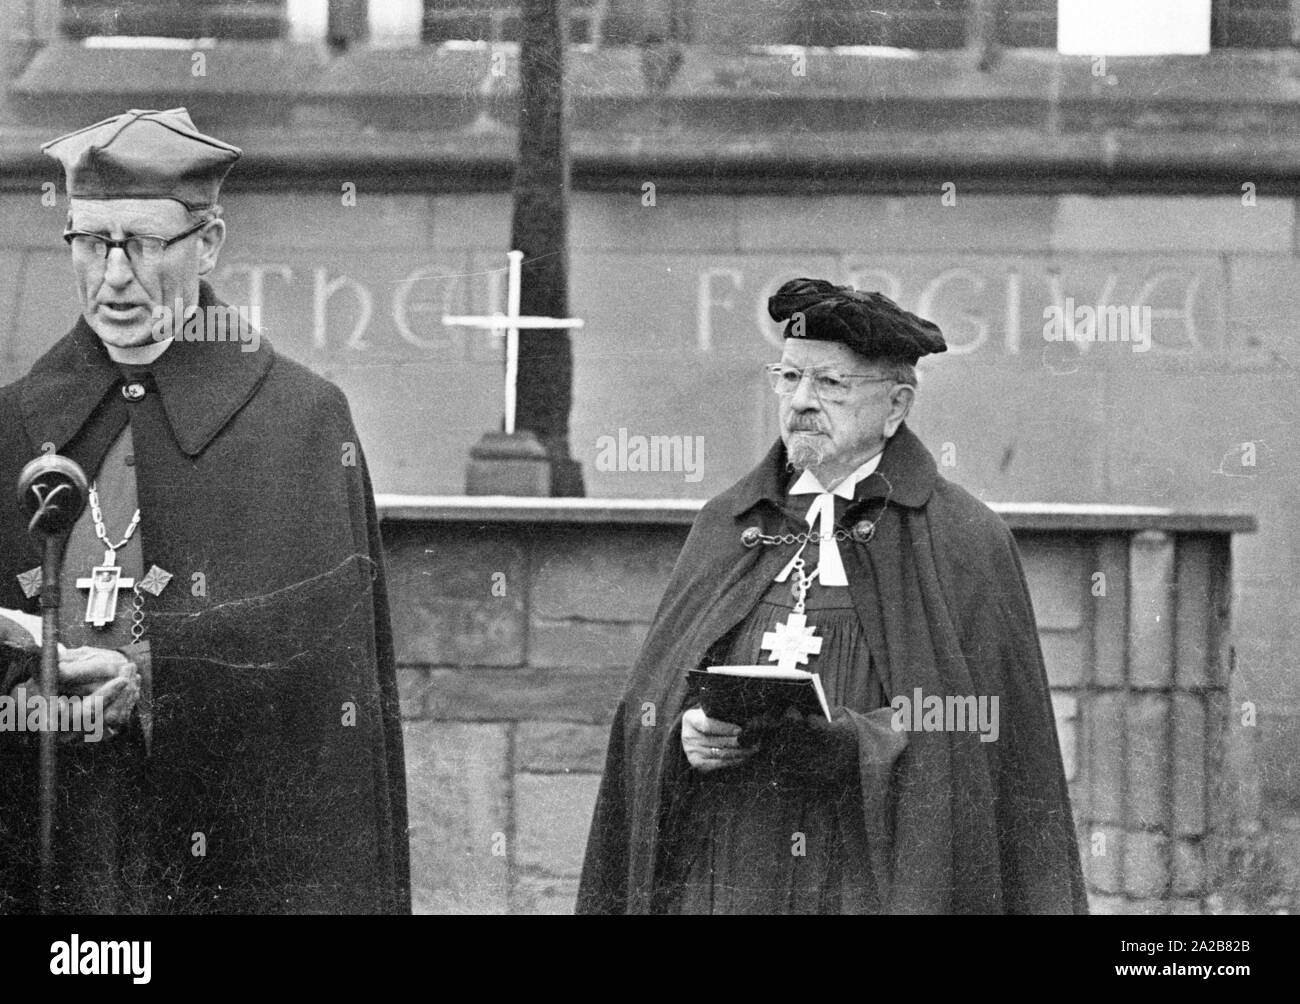 The German bishop, Otto Dibelius (right), participates at the groundbreaking ceremony  of the 'International Center for Reconciliation' in the ruin of the destroyed St Michael's Cathedral. Behind him on the altar, the Cross of Nails as a sign of reconciliation. Stock Photo